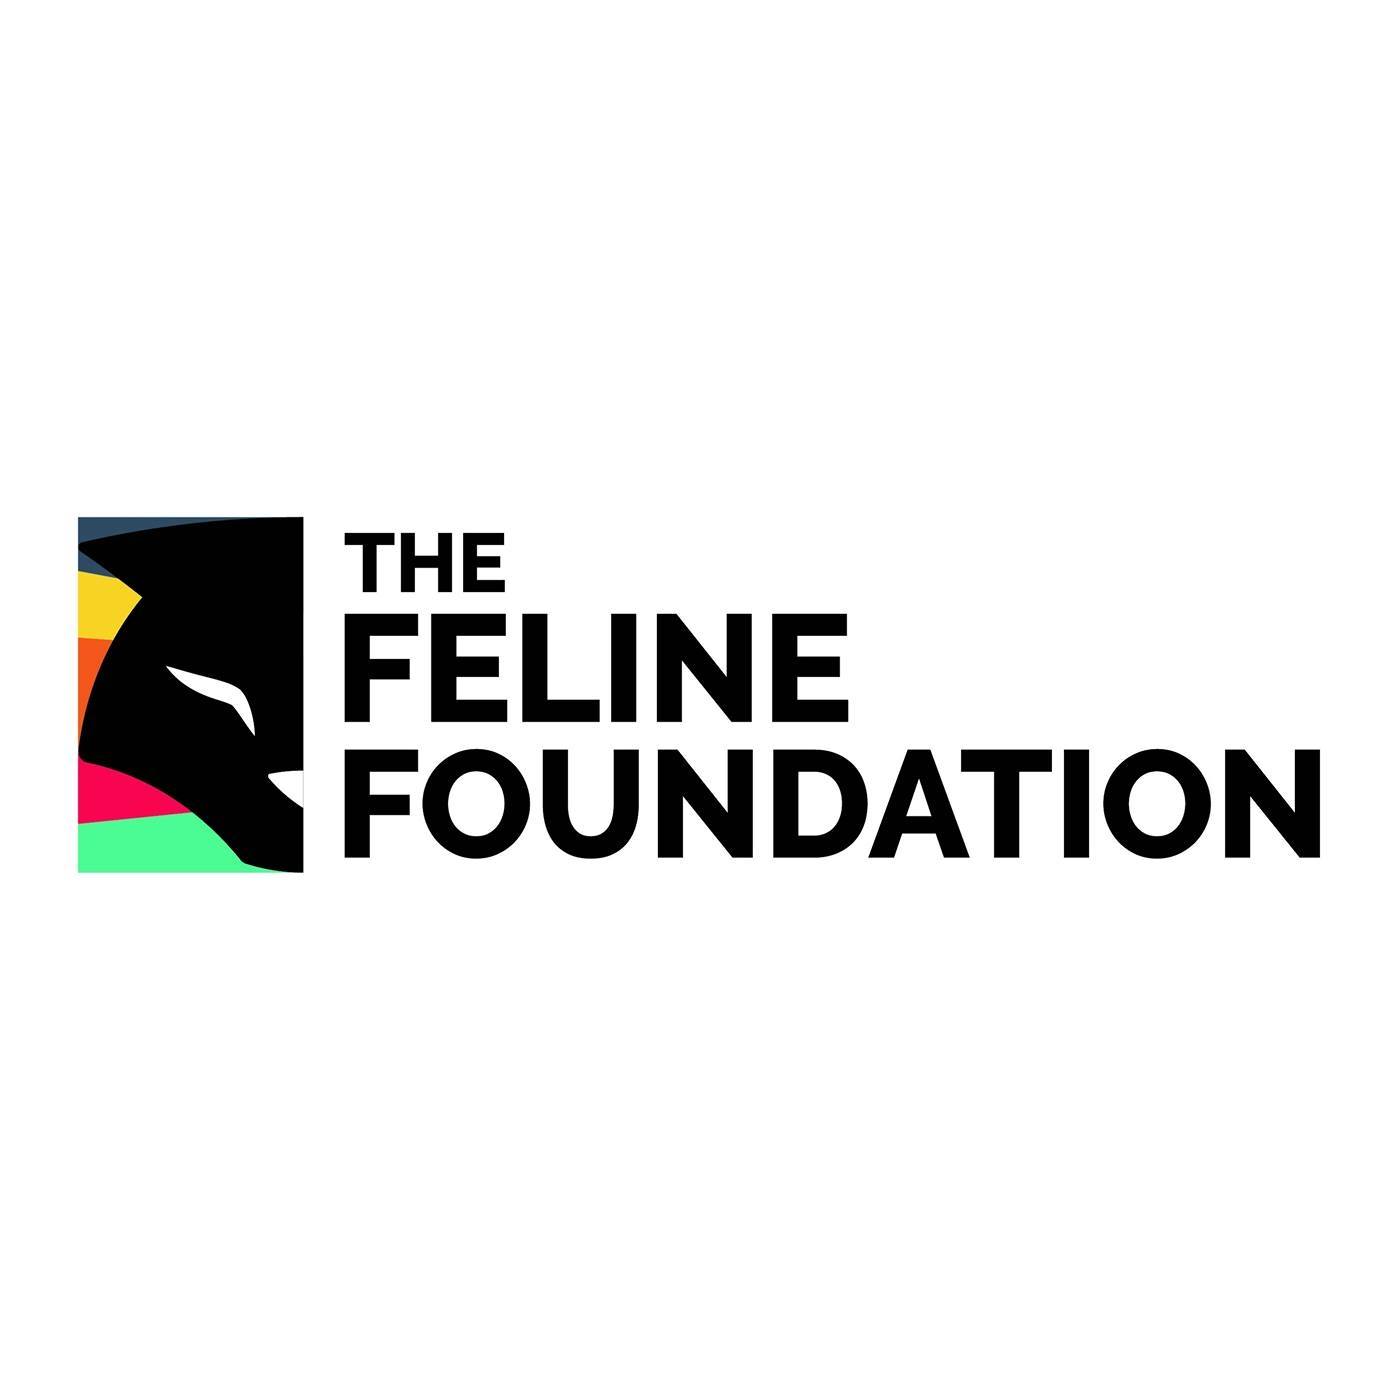 The Feline Foundation Community Veterinary Clinic and Pet Store|Veterinary|Medical Services